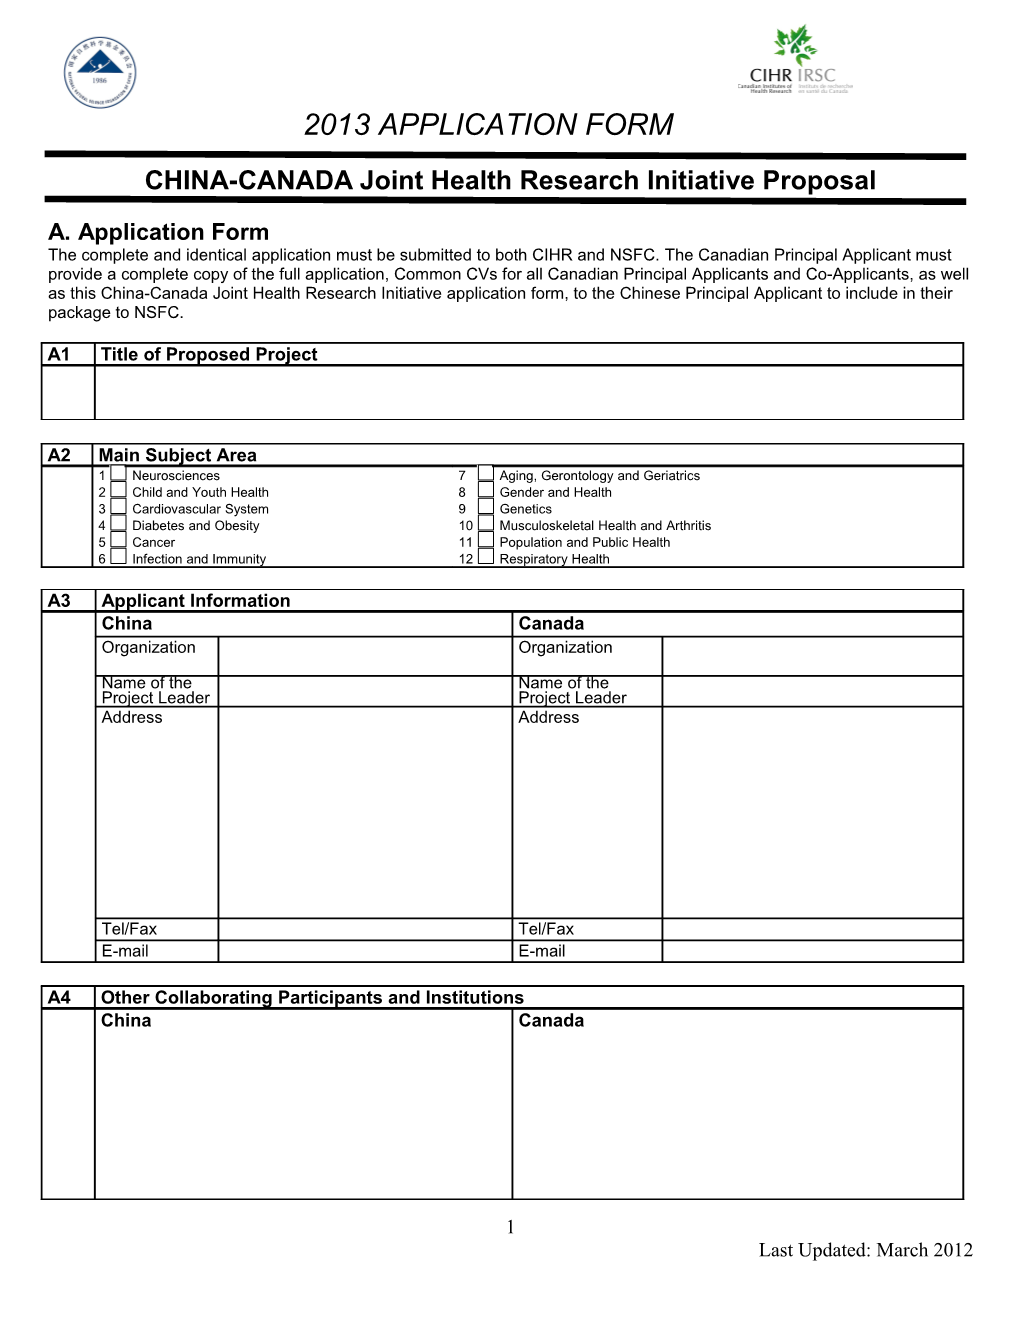 CHINA-CANADA Joint Health Research Initiative Proposal